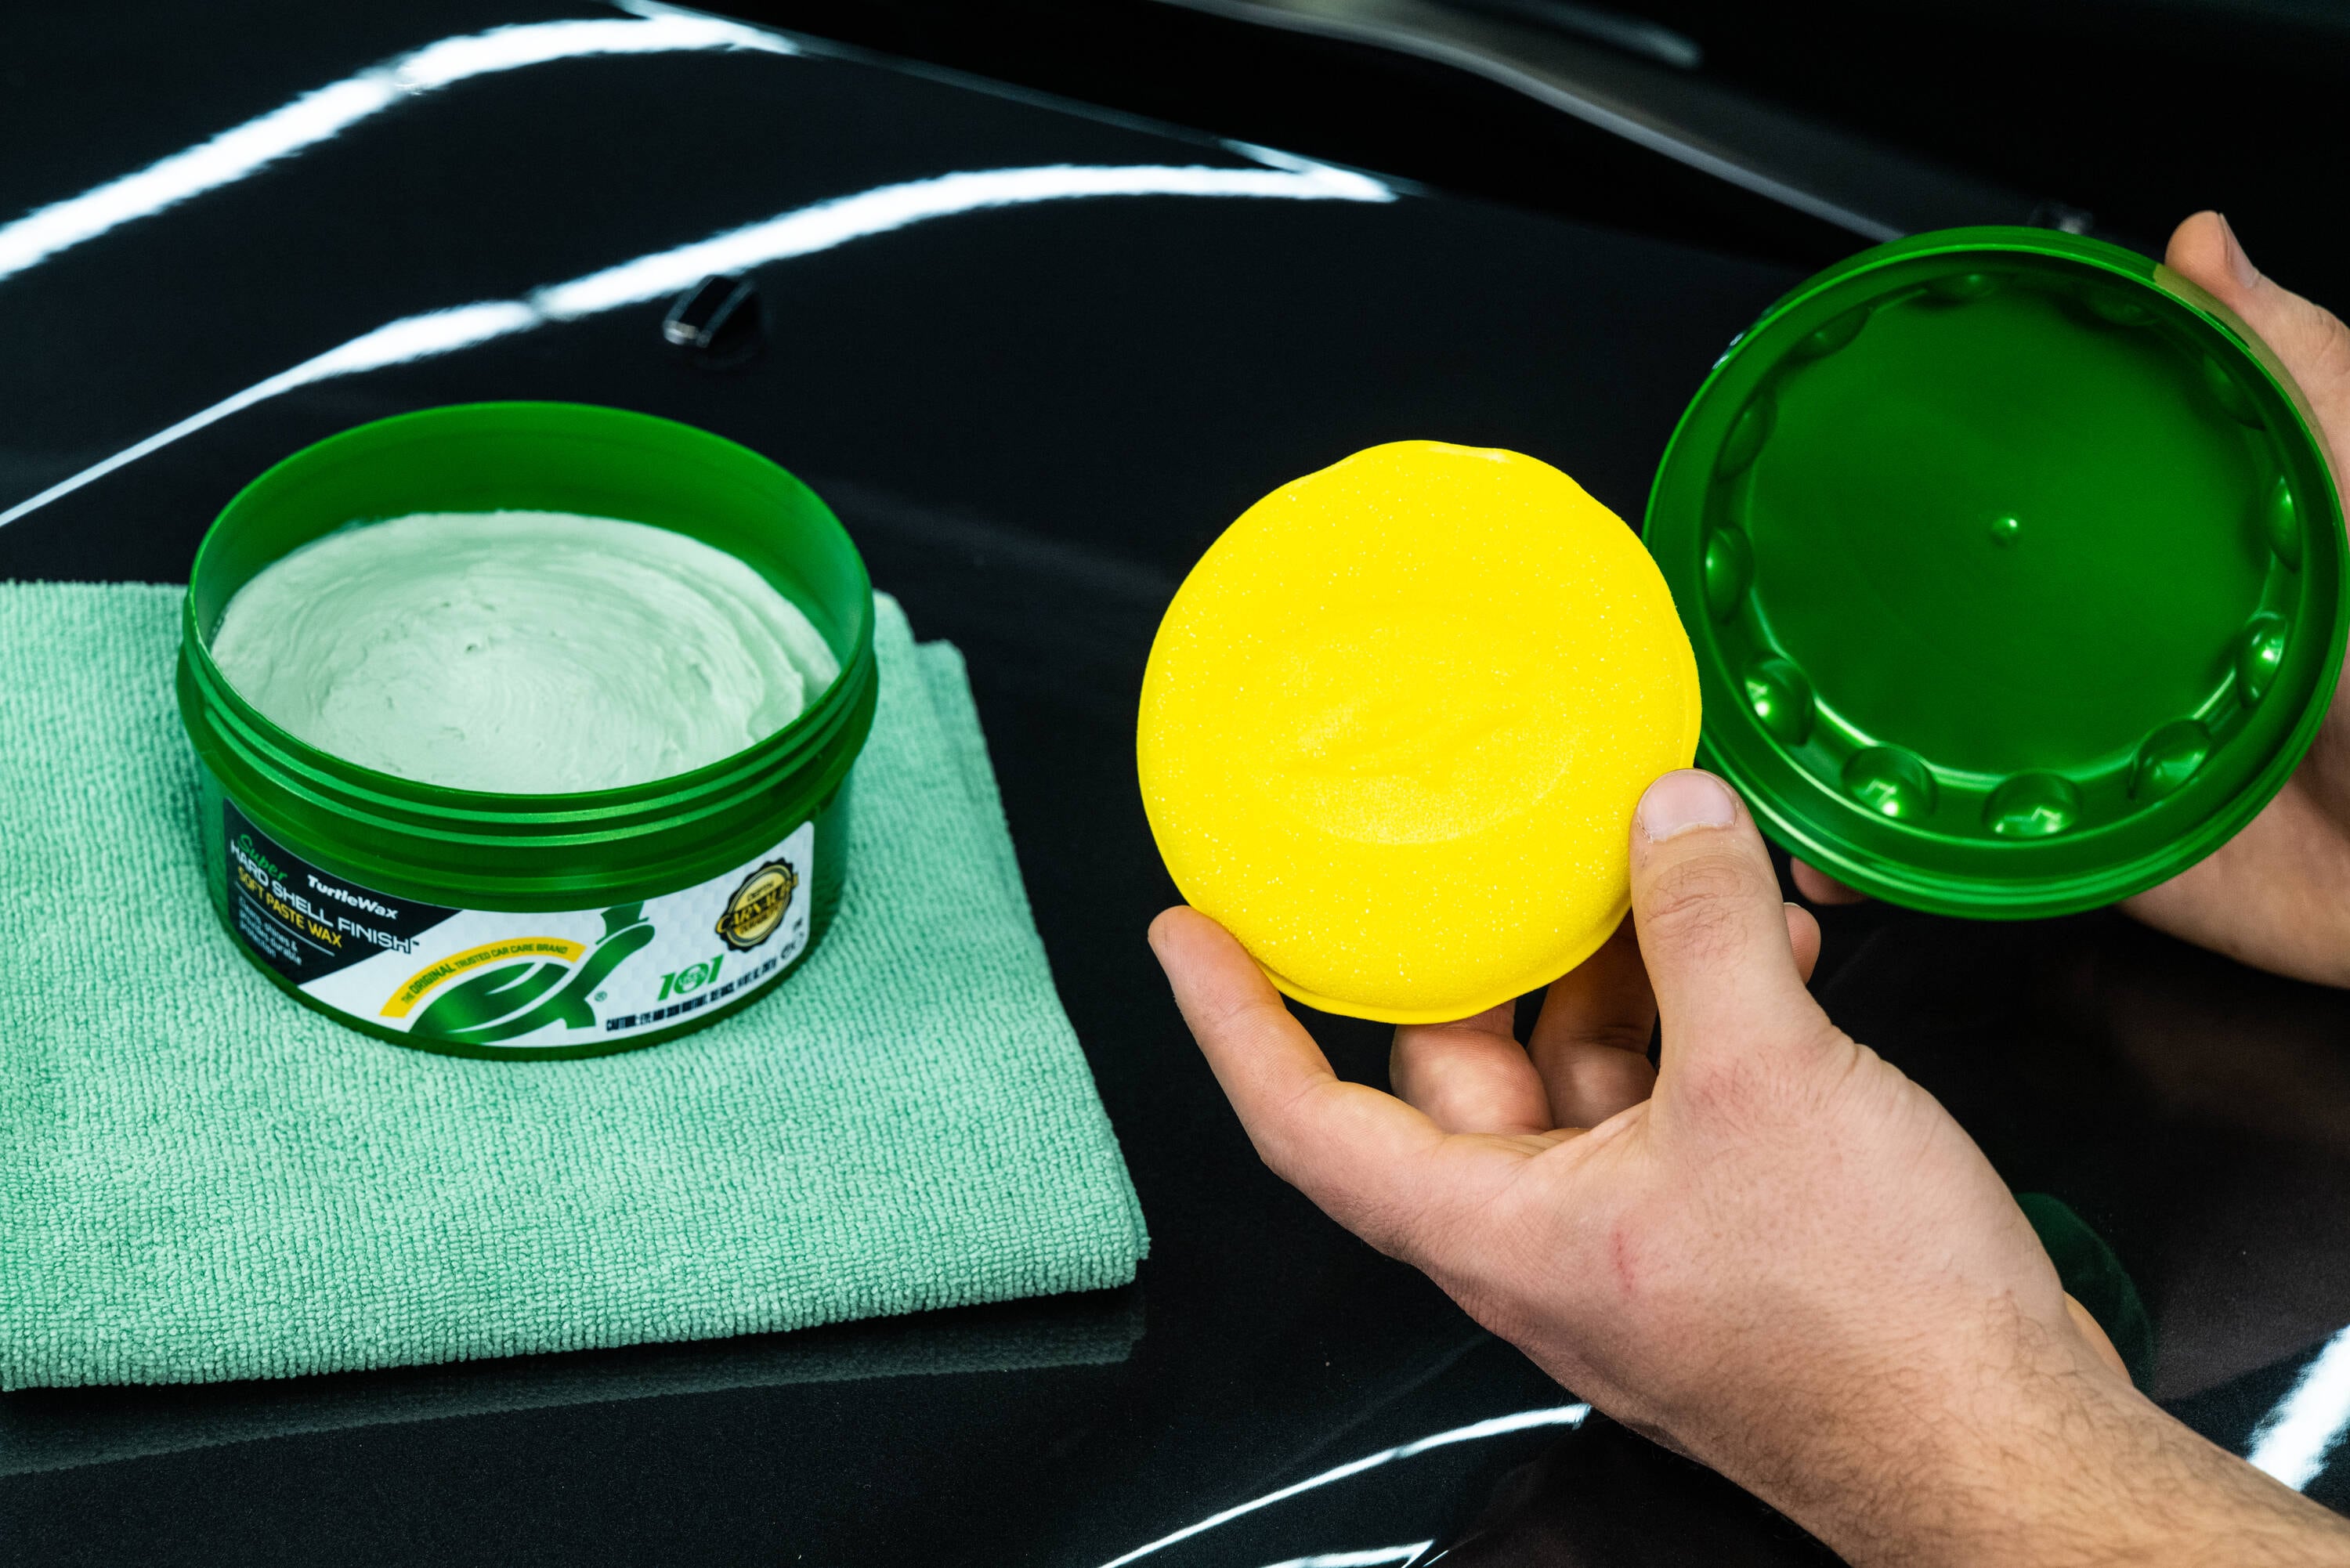 Reviews for TURTLE WAX 14 oz. Super Hard Shell Paste Wax